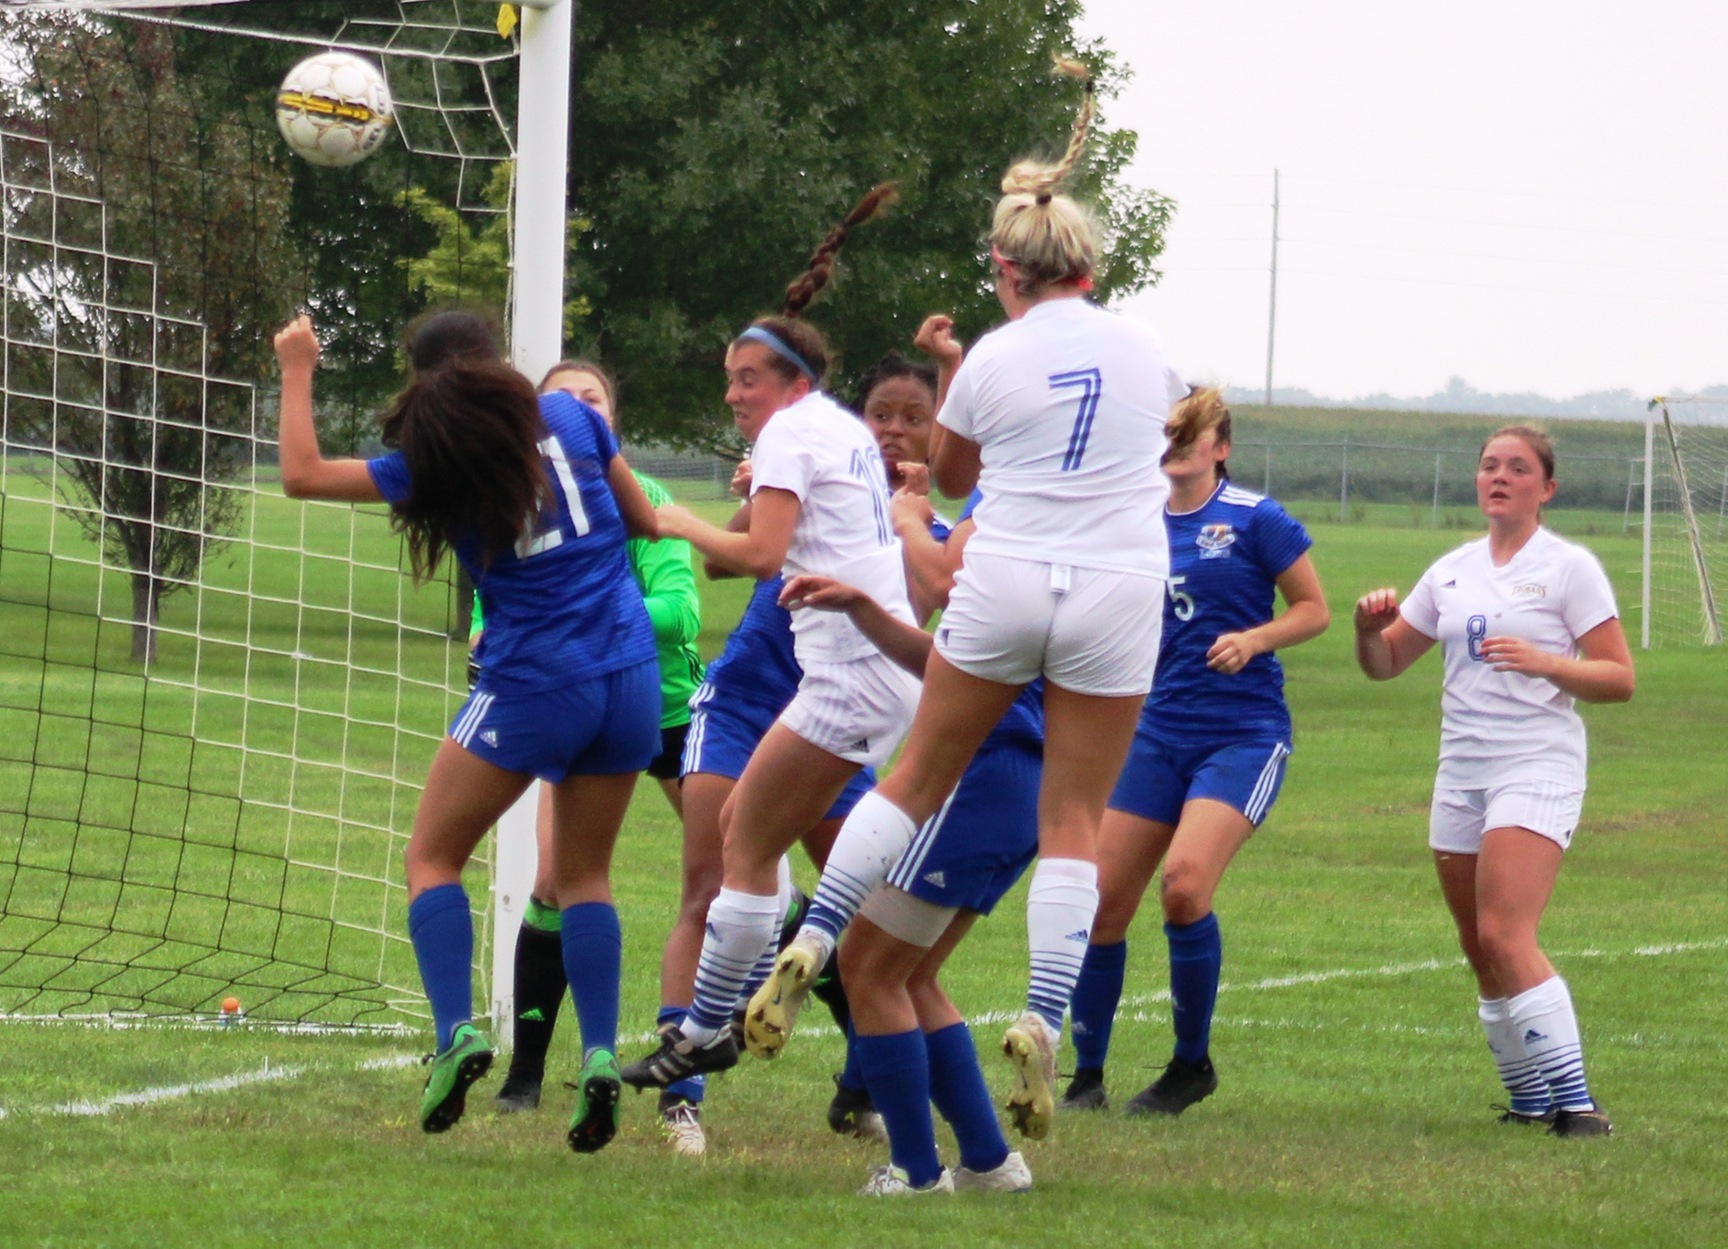 Jessica Altman (7) scores on a header from a corner kick in the first half of Wednesday's match against Iowa Lakes.